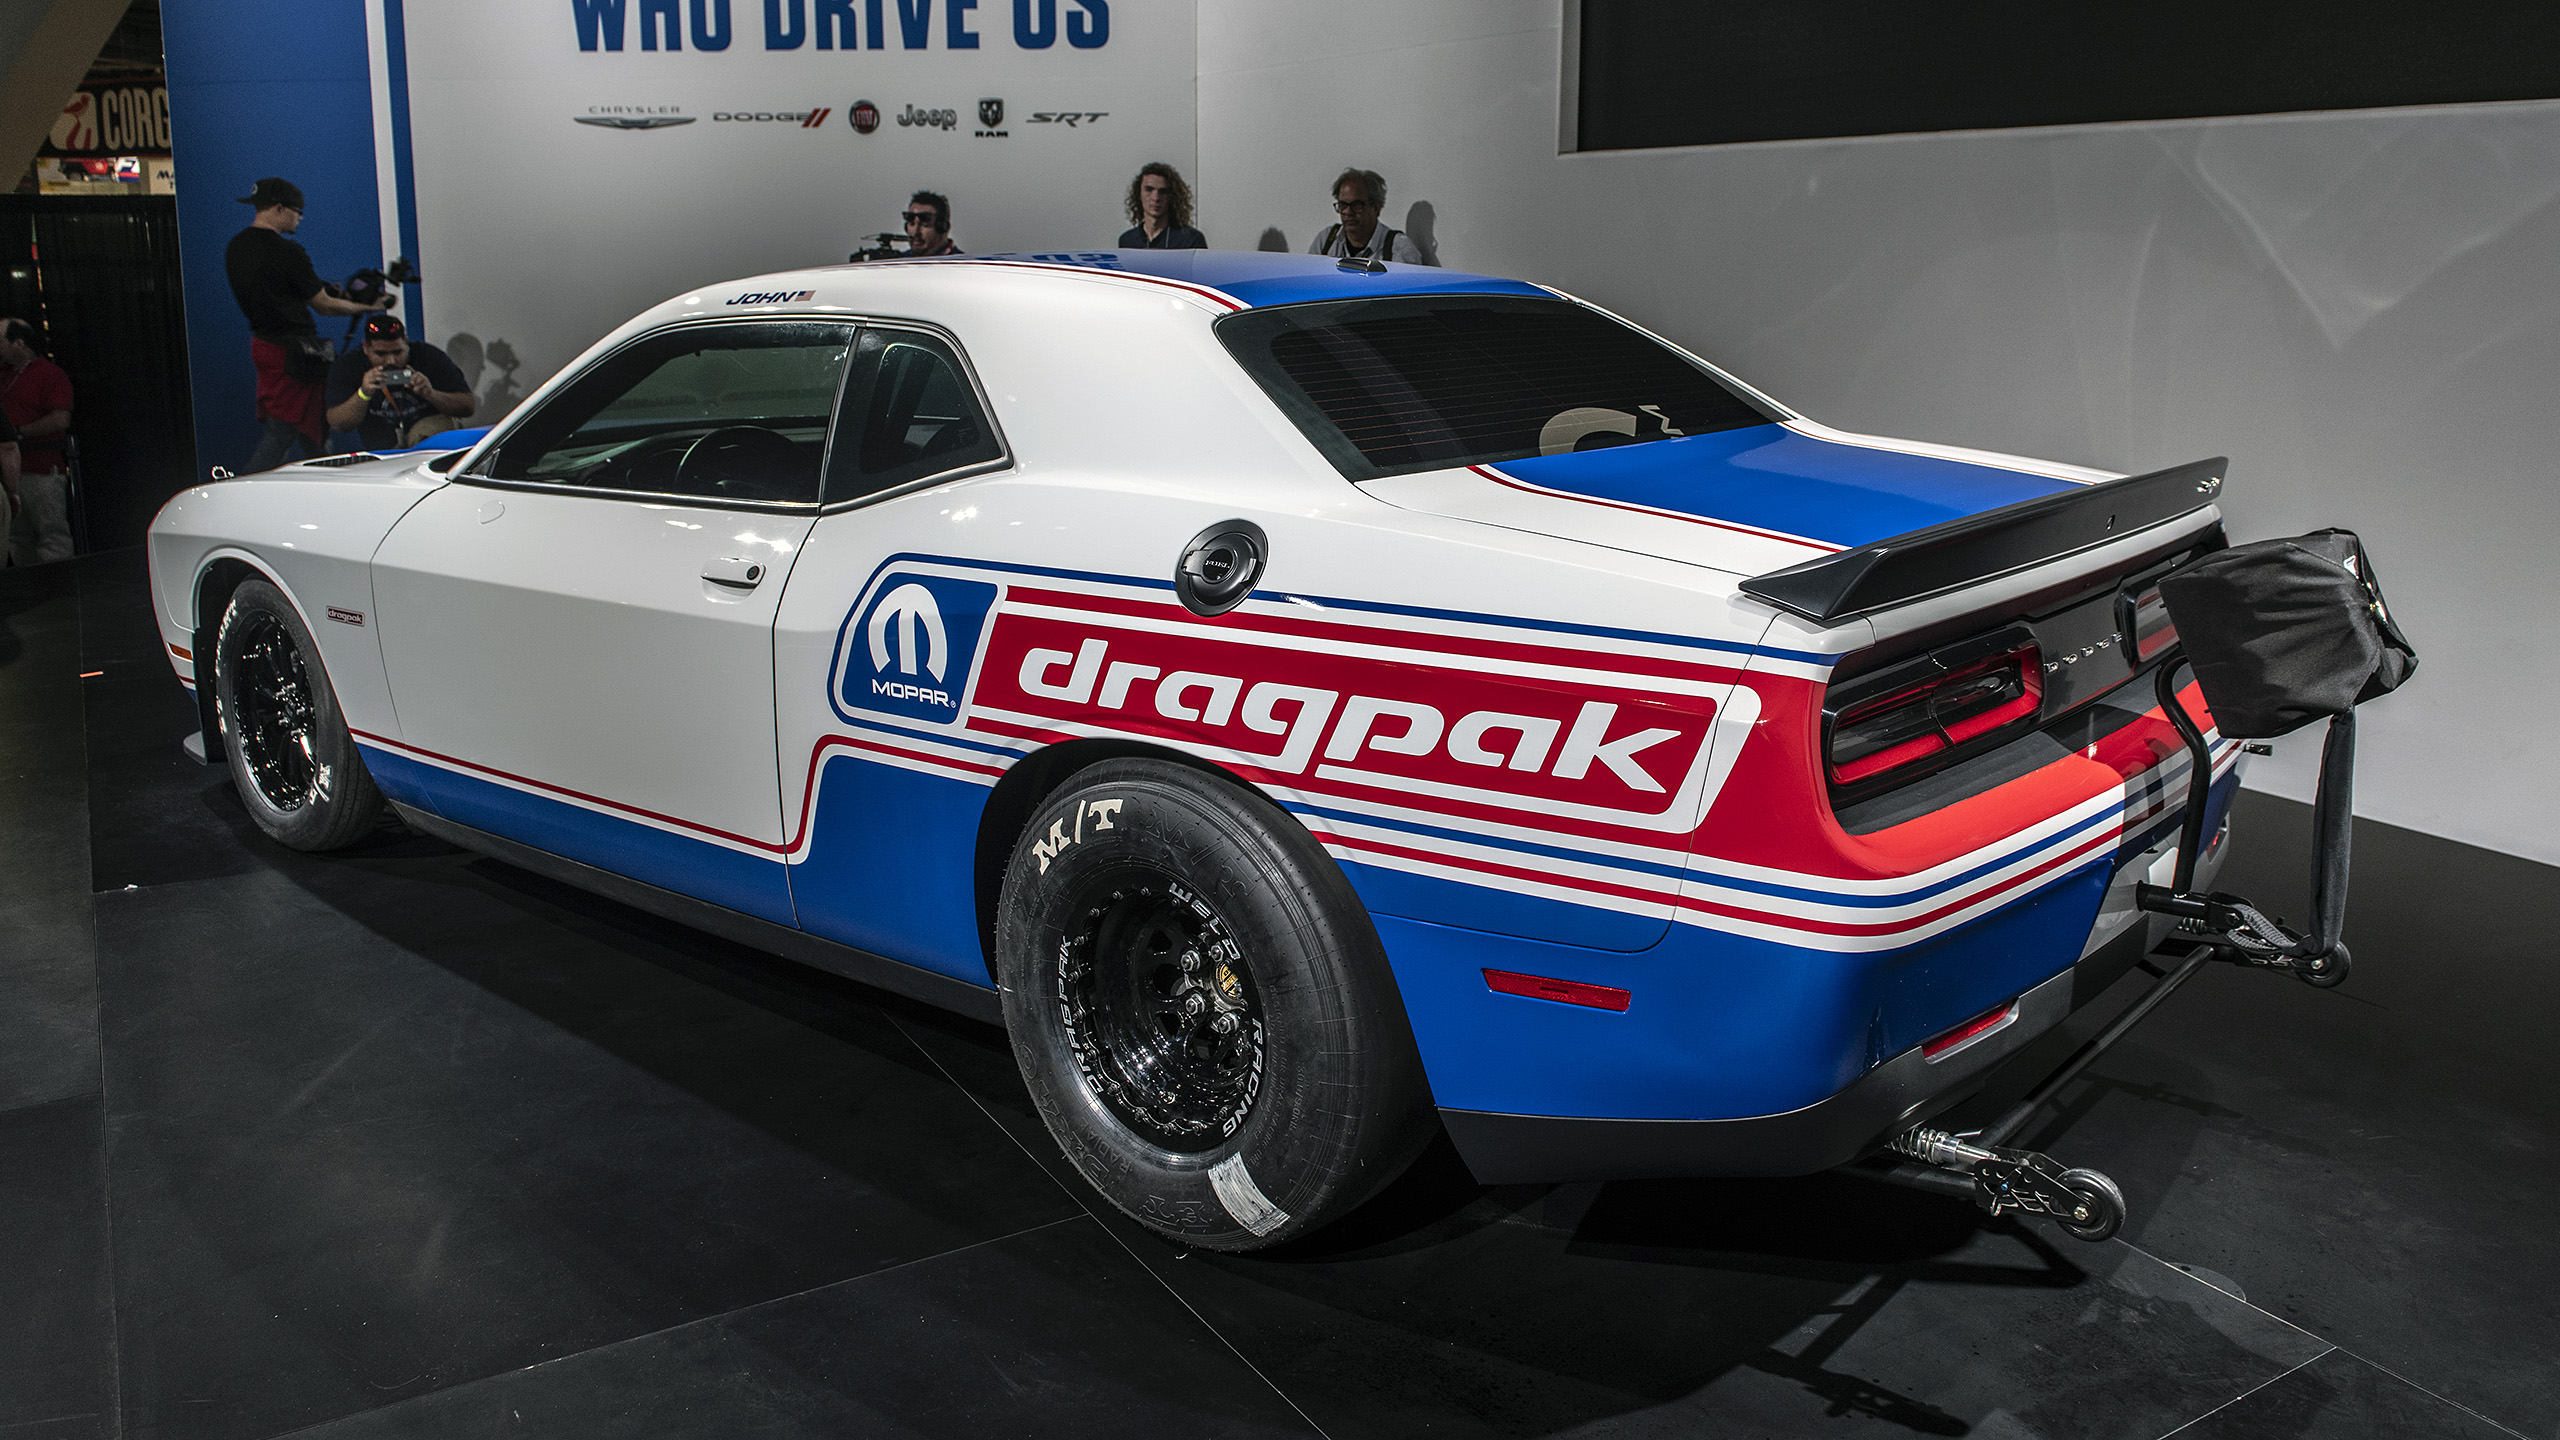 2020 Dodge Challenger Drag Pak returns with supercharged power only